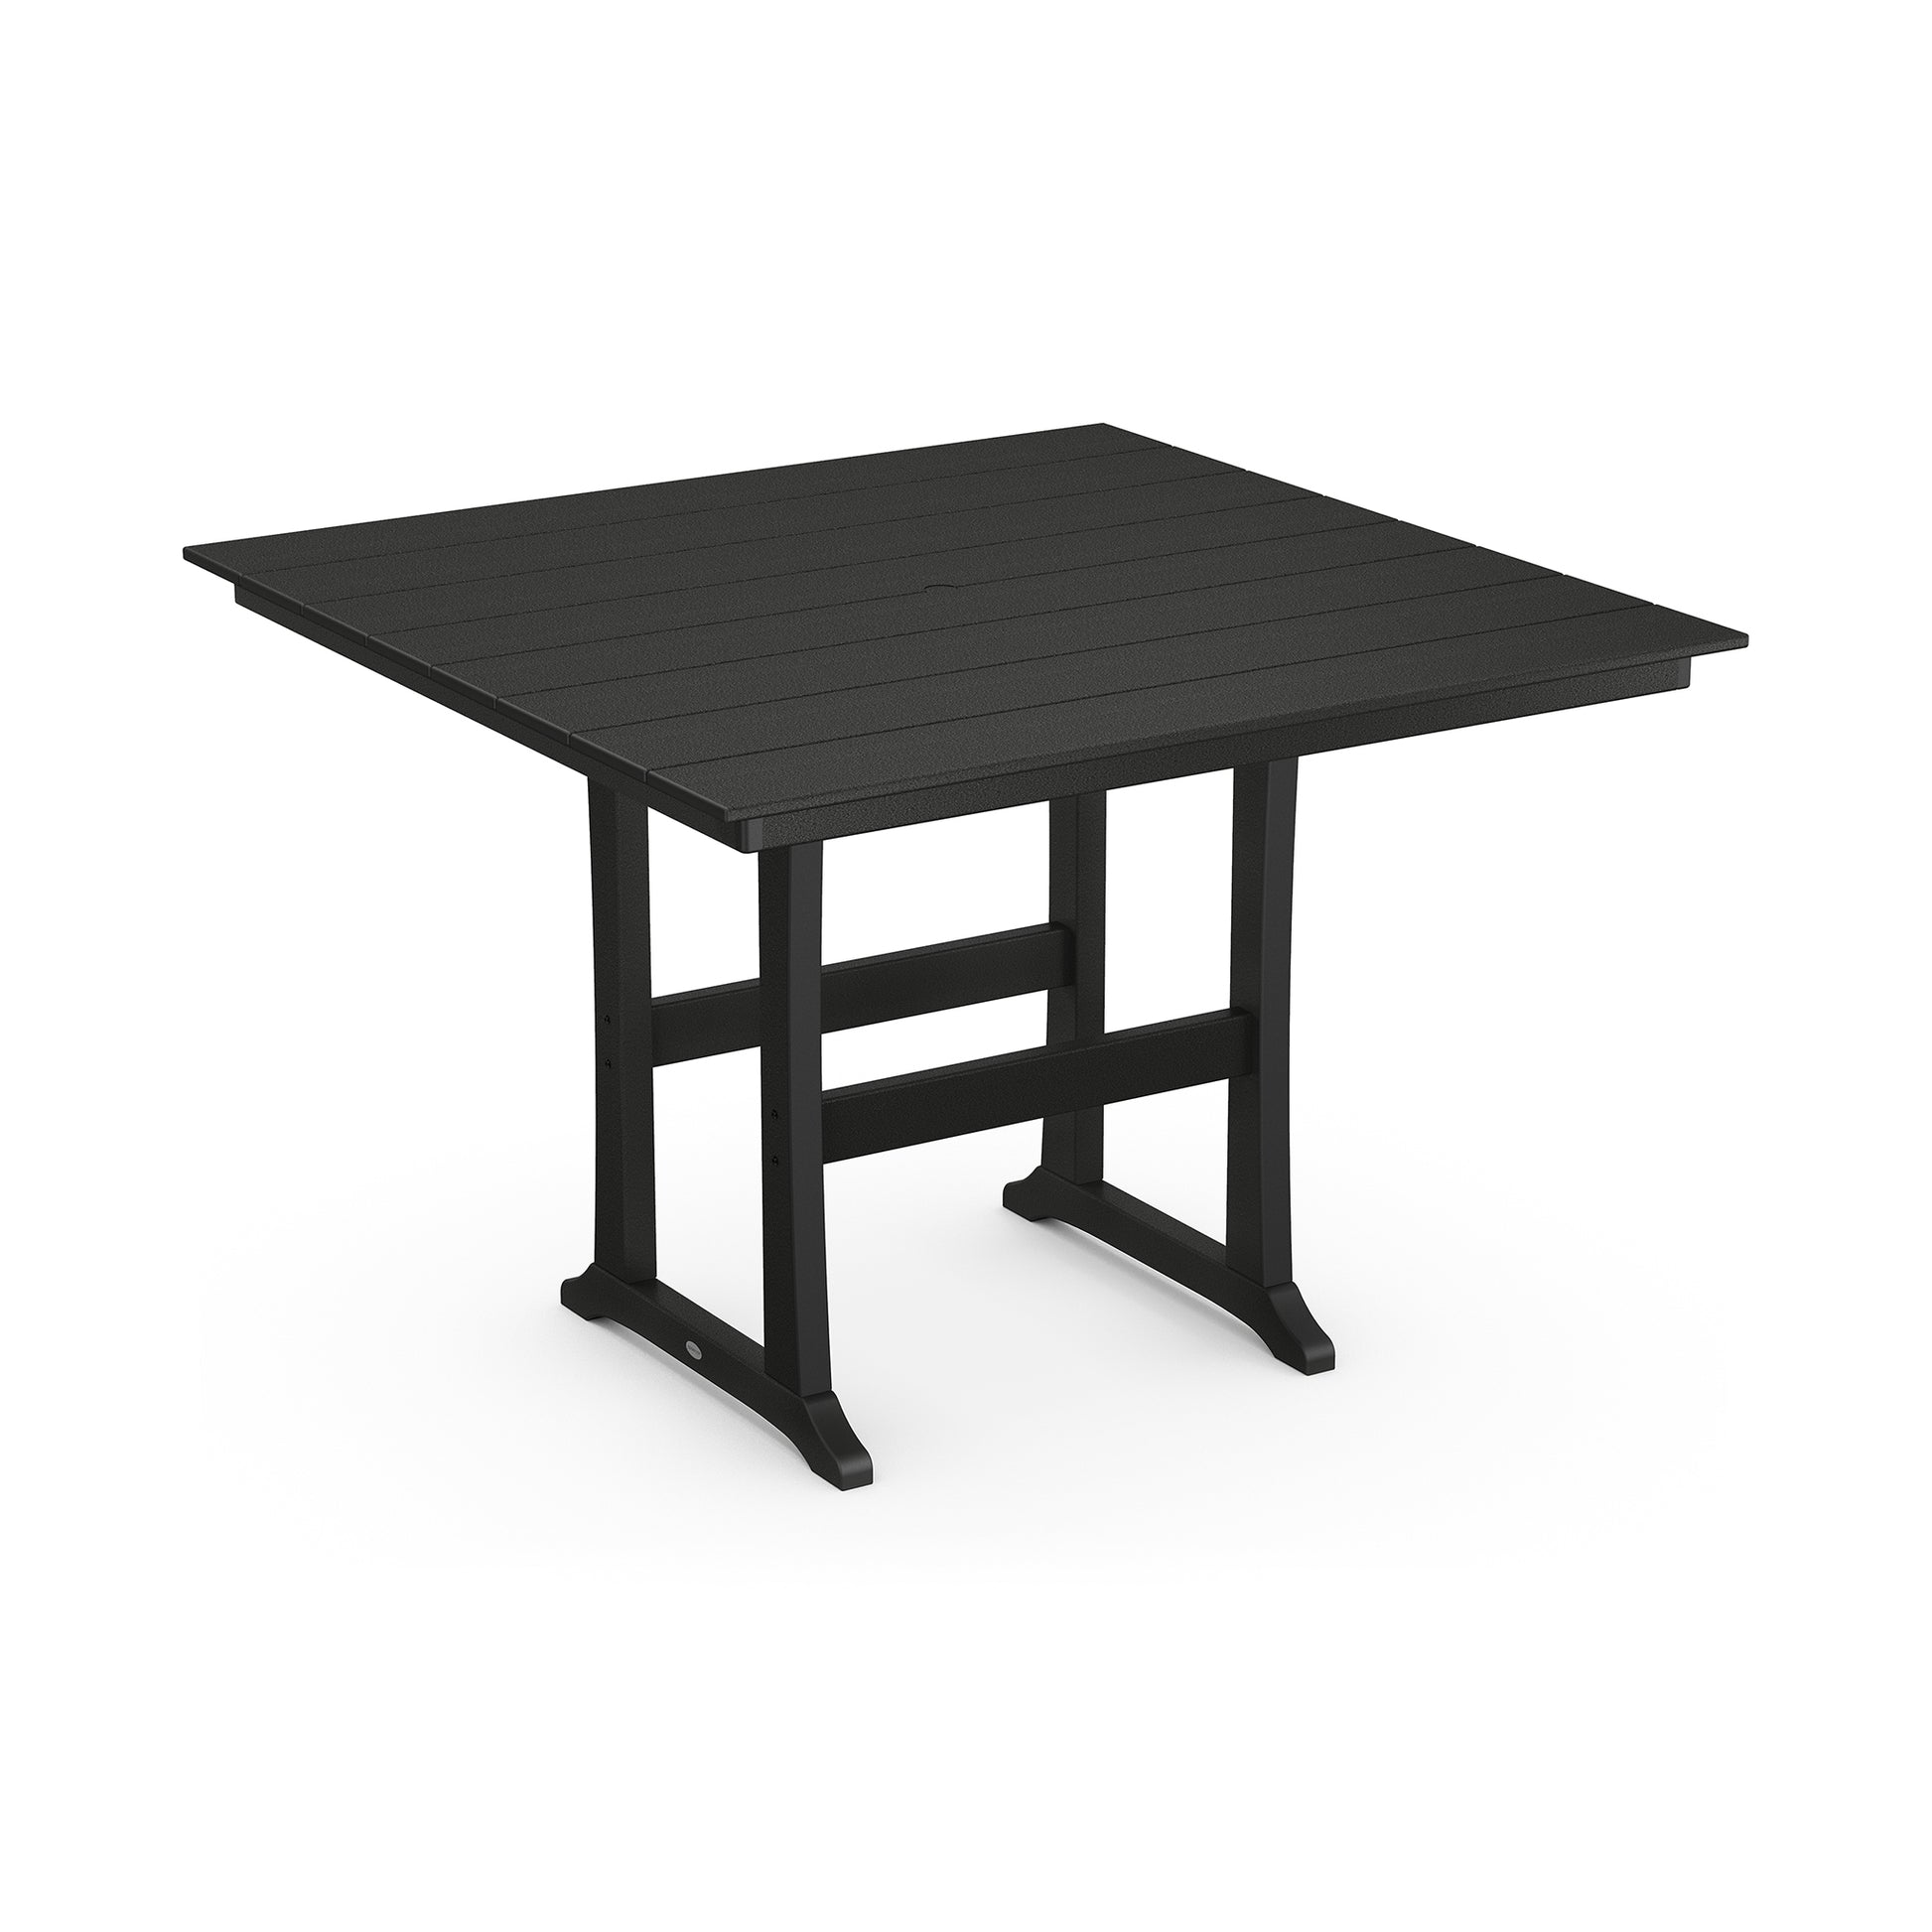 A modern black POLYWOOD Farmhouse Trestle 59" Bar Table with a slatted top and a sturdy rectangular frame, isolated on a white background.